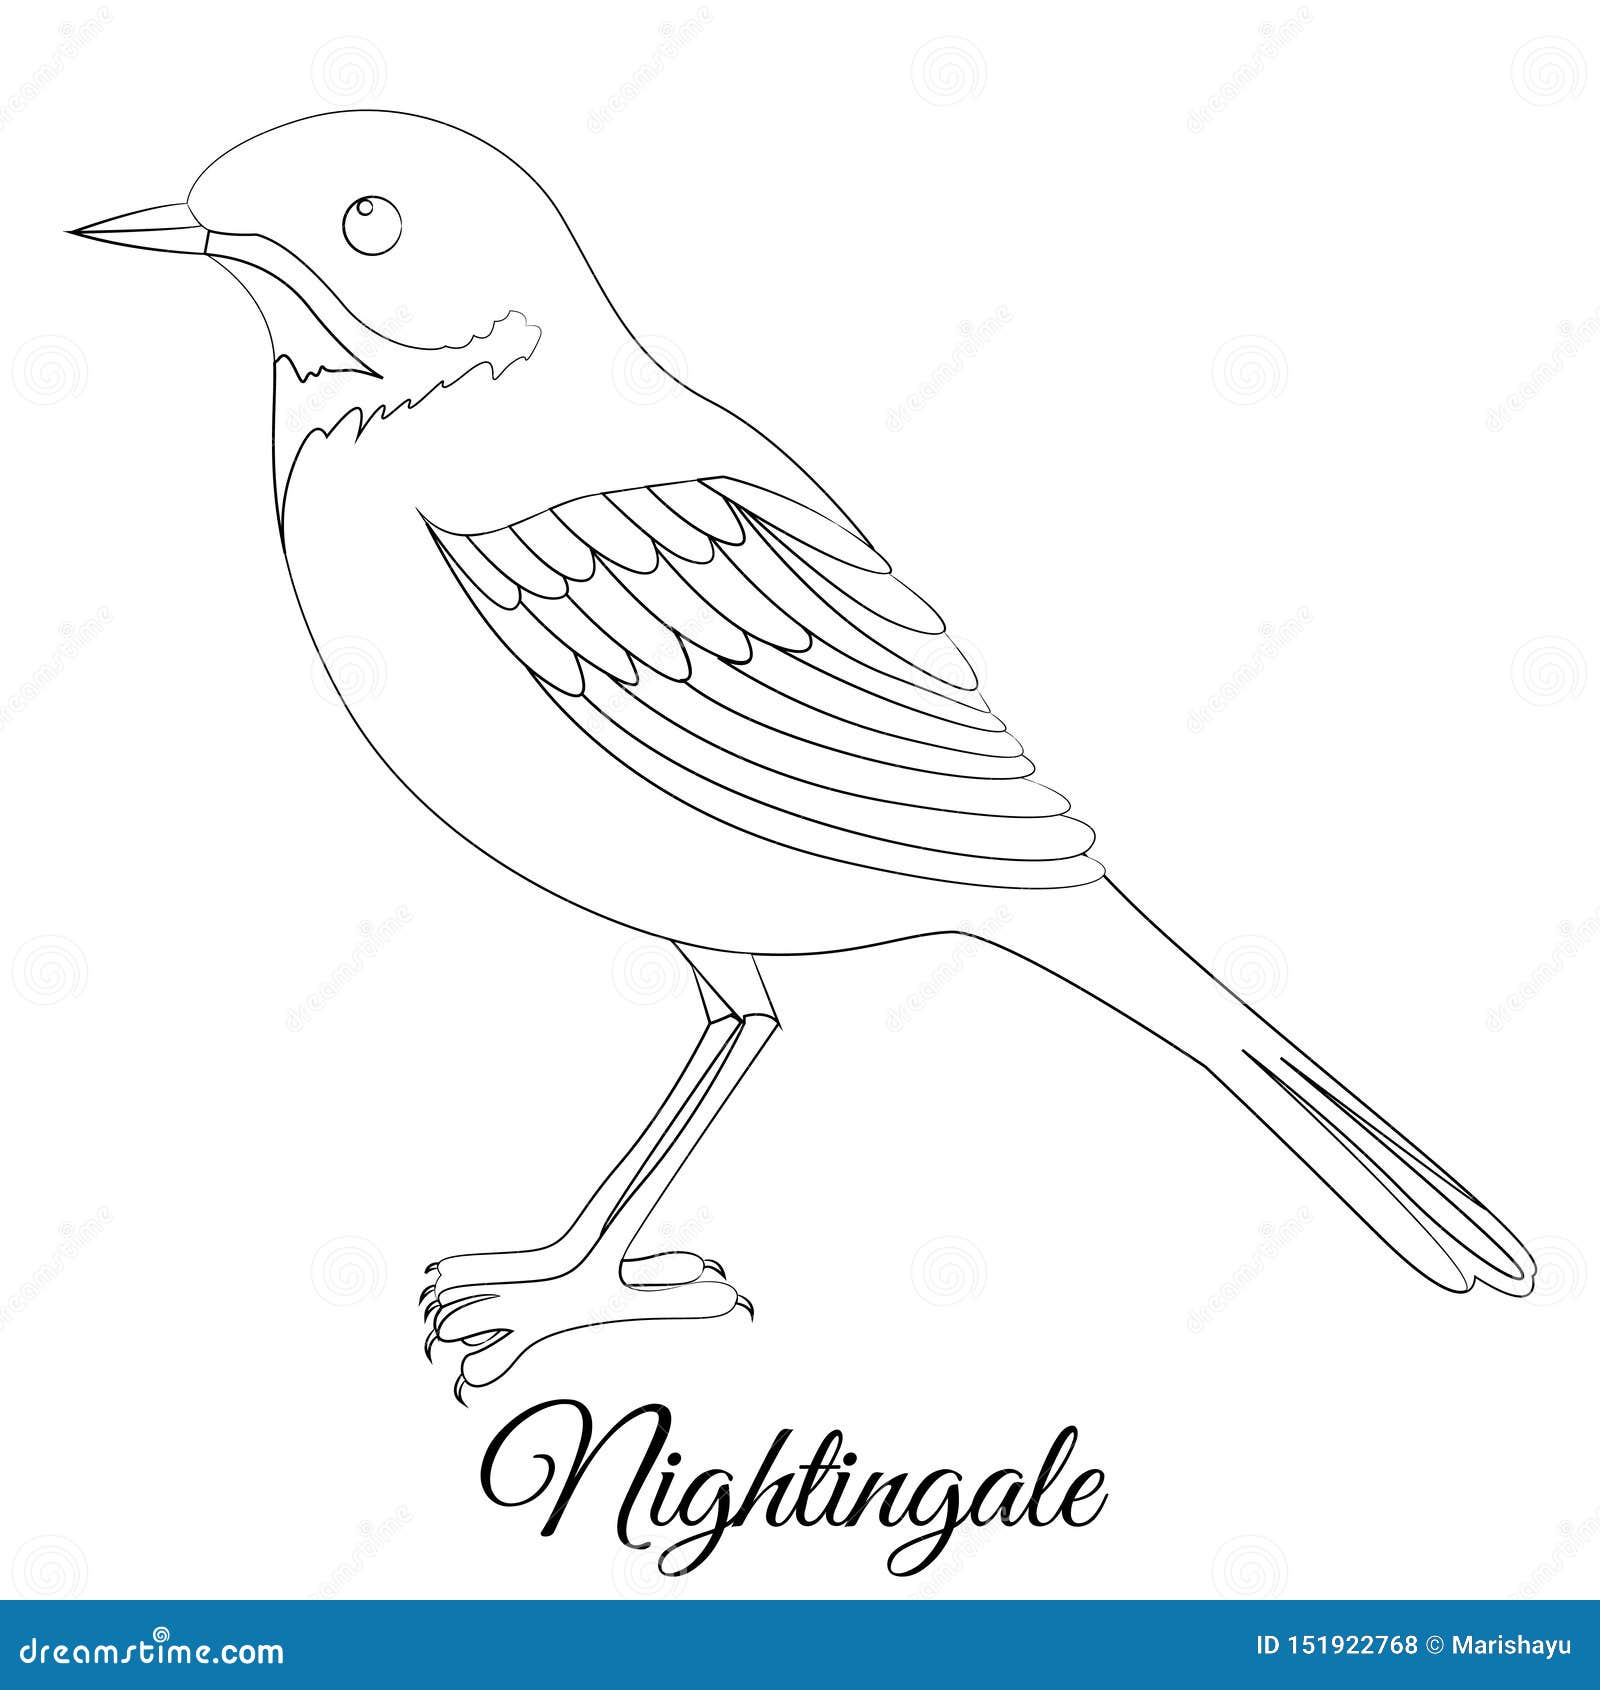 Nightingale the Bird is a Nightingale Graphic Black and White Drawing of  a Small Songbird Stock Illustration  Illustration of branch cotton  204186677